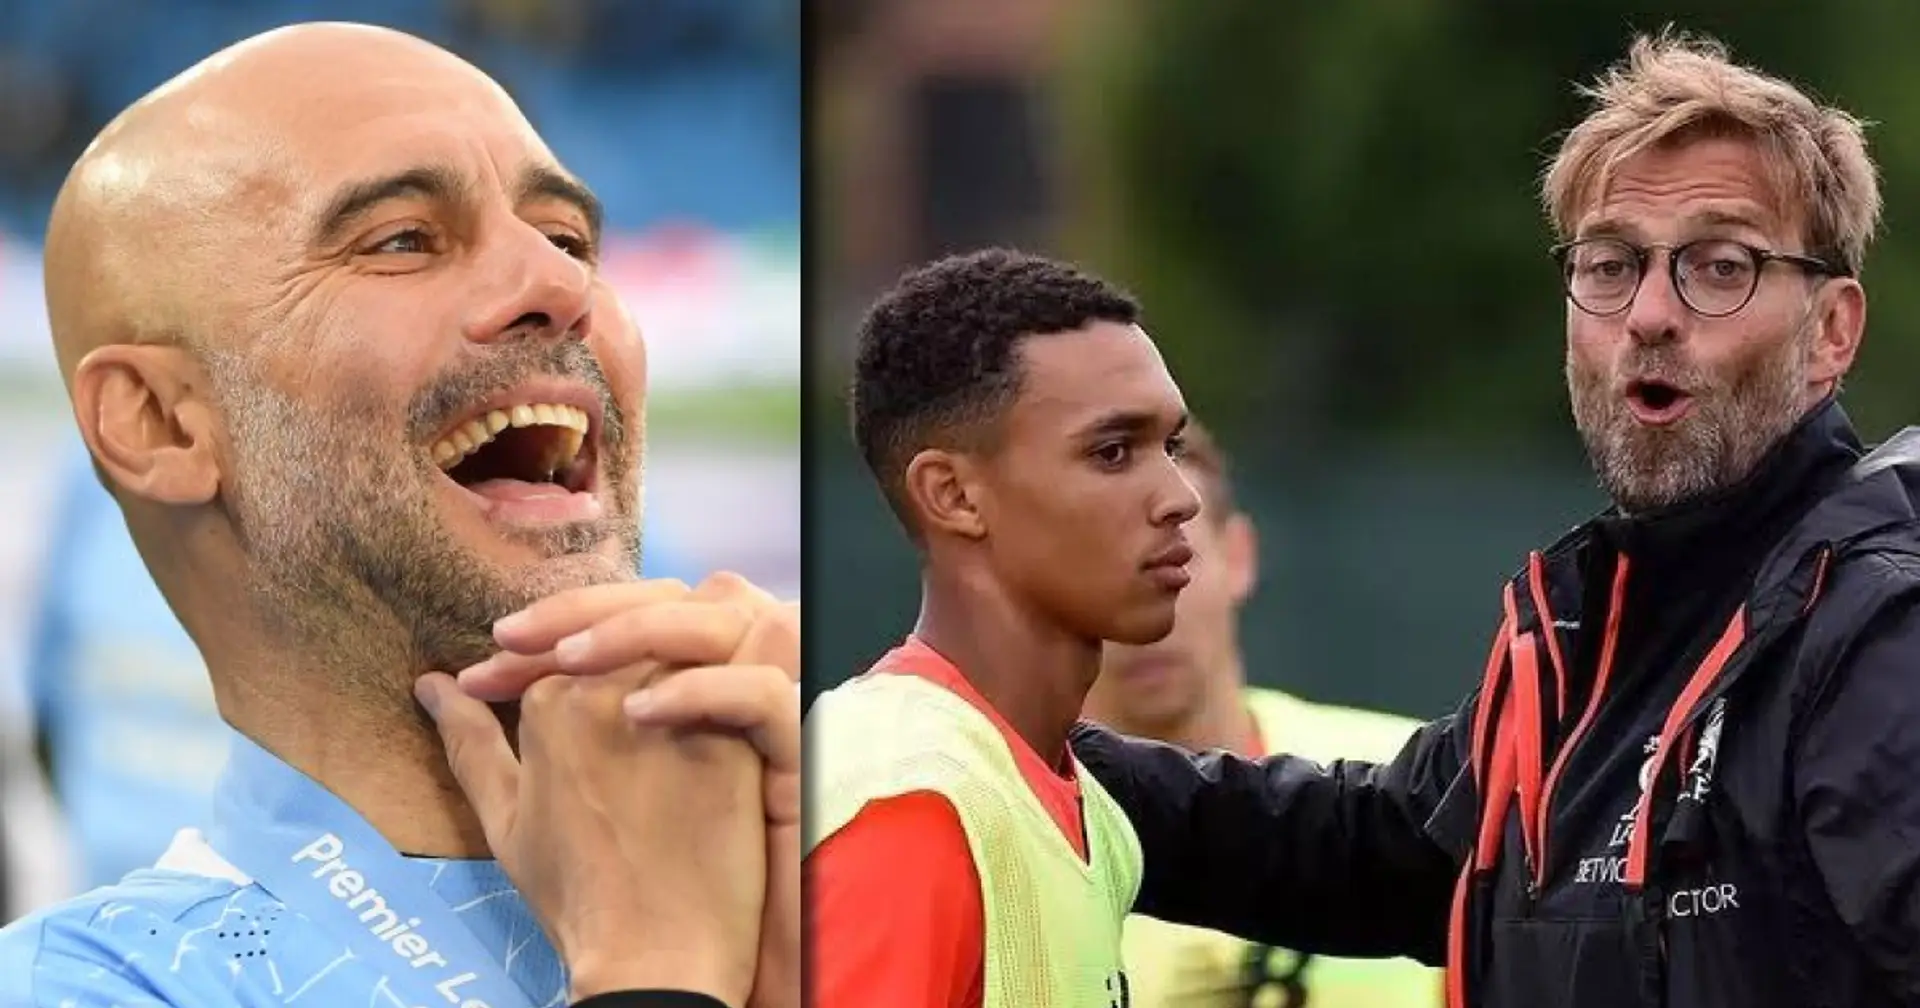 Liverpool fan 'yet to see Pep turn an unknown player into superstar' — he's so so so wrong